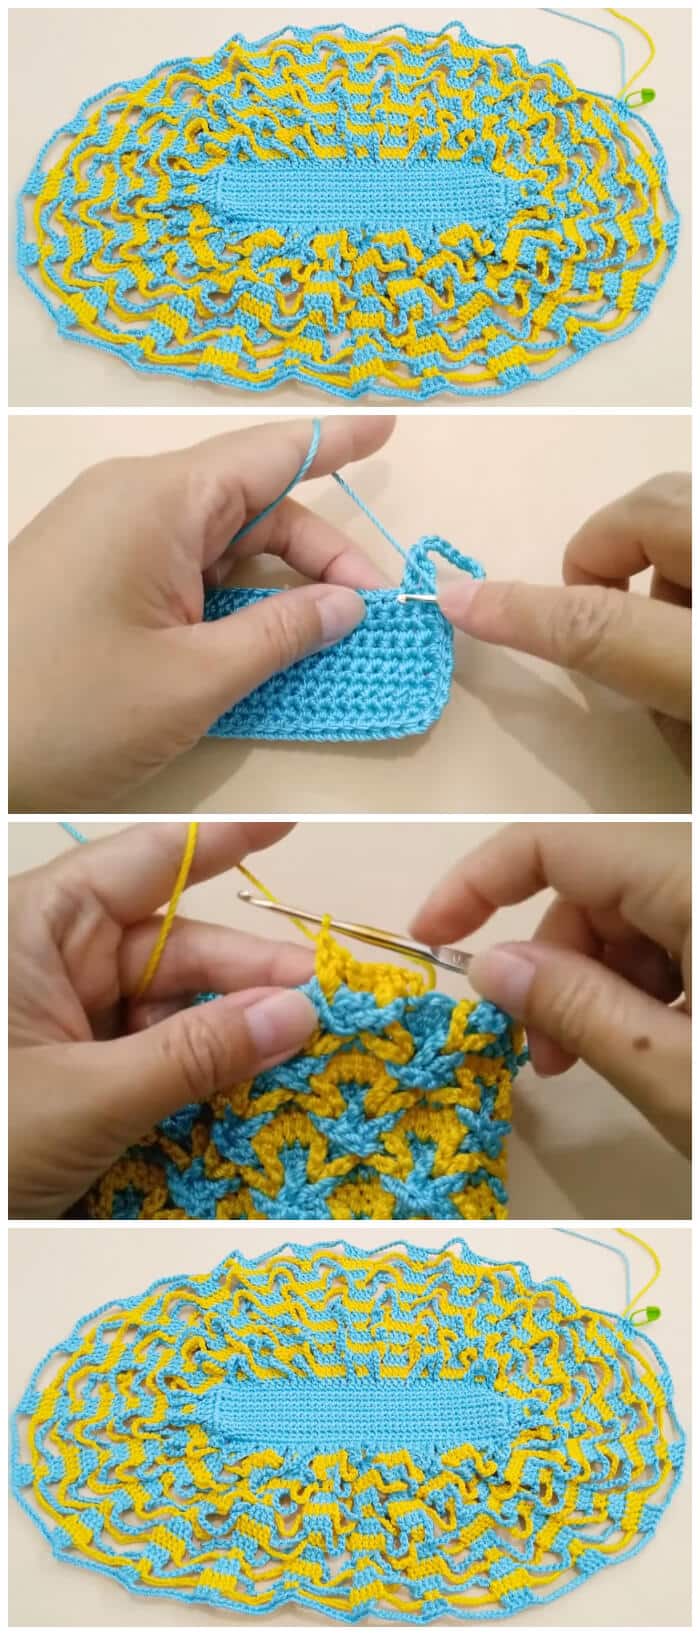 Are you looking for a way to make a Mini Crochet Purse ? This delightfully easy crochet tutorial is a creative way to make something fun and unique for everyone on your holiday list.
